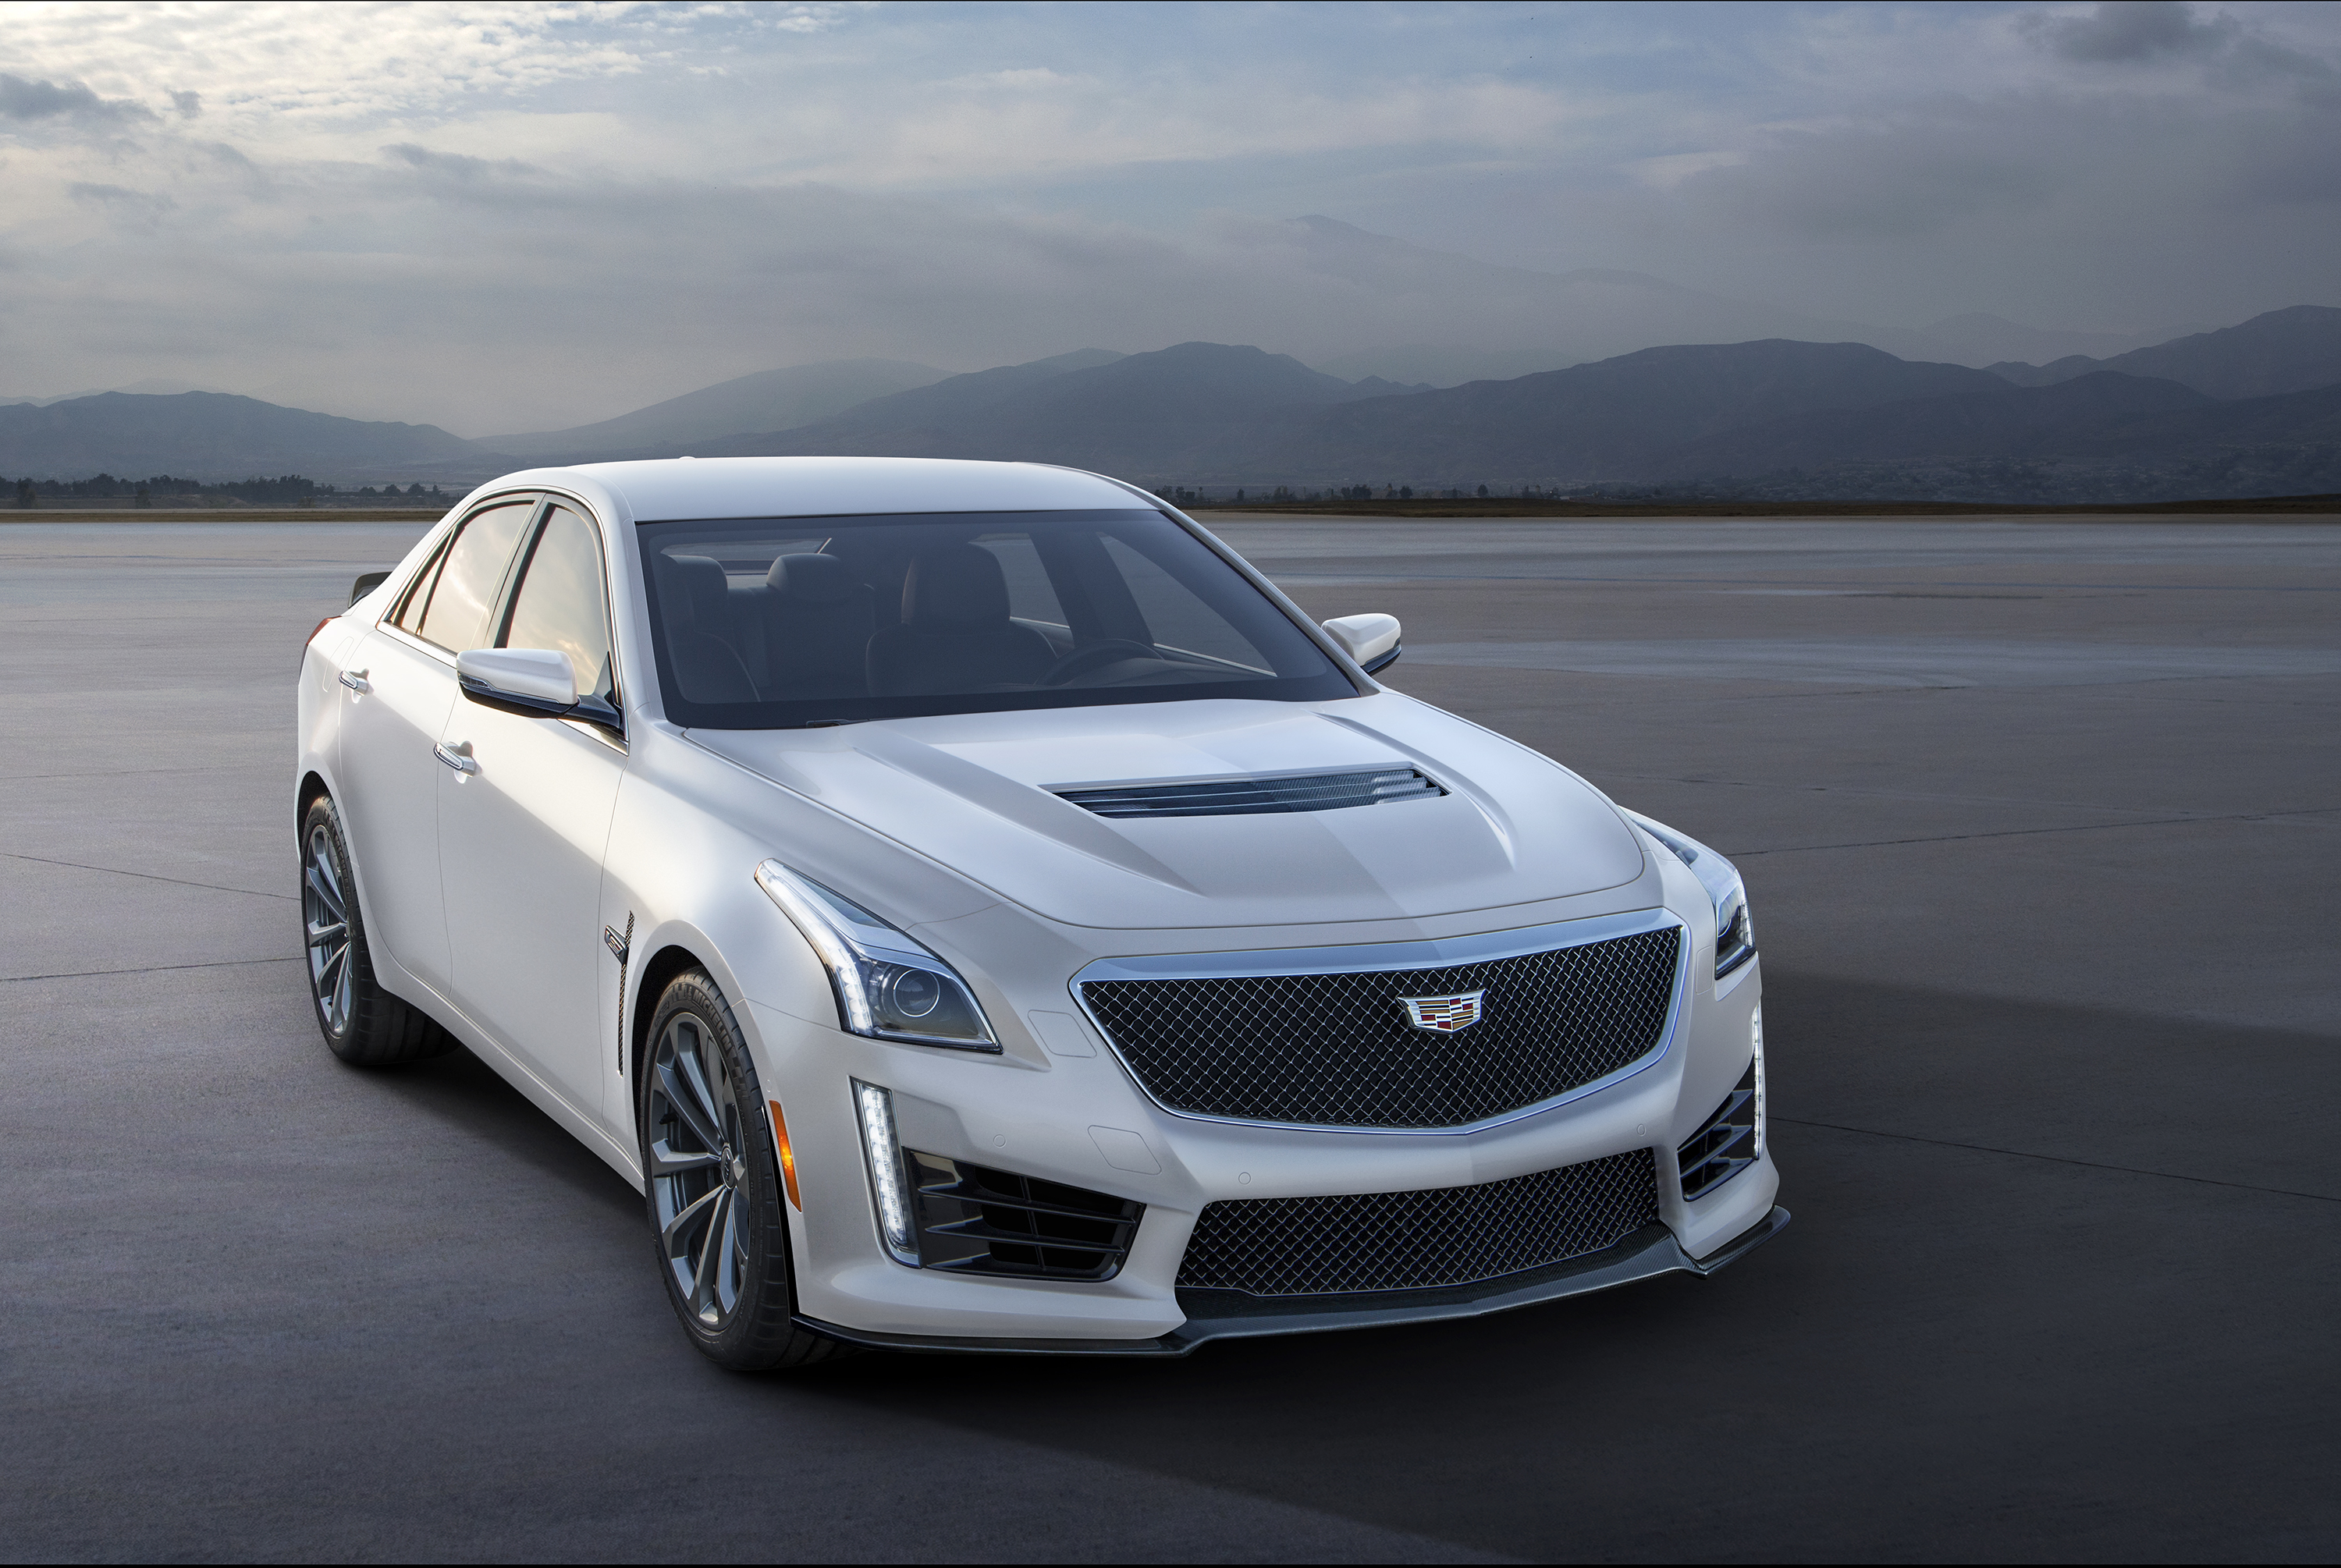 Cadillac will produce exclusive Crystal White Frost editions of its all-new high performance V-Series cars, starting in October. The special package celebrates the new ATS-V Coupe and Sedan, and the new CTS-V super-sedan. Available on all 3 models, the exclusive package is highlighted by special low-gloss Crystal White Frost paint first shown at the world premieres of the ATS-V and CTS-V.